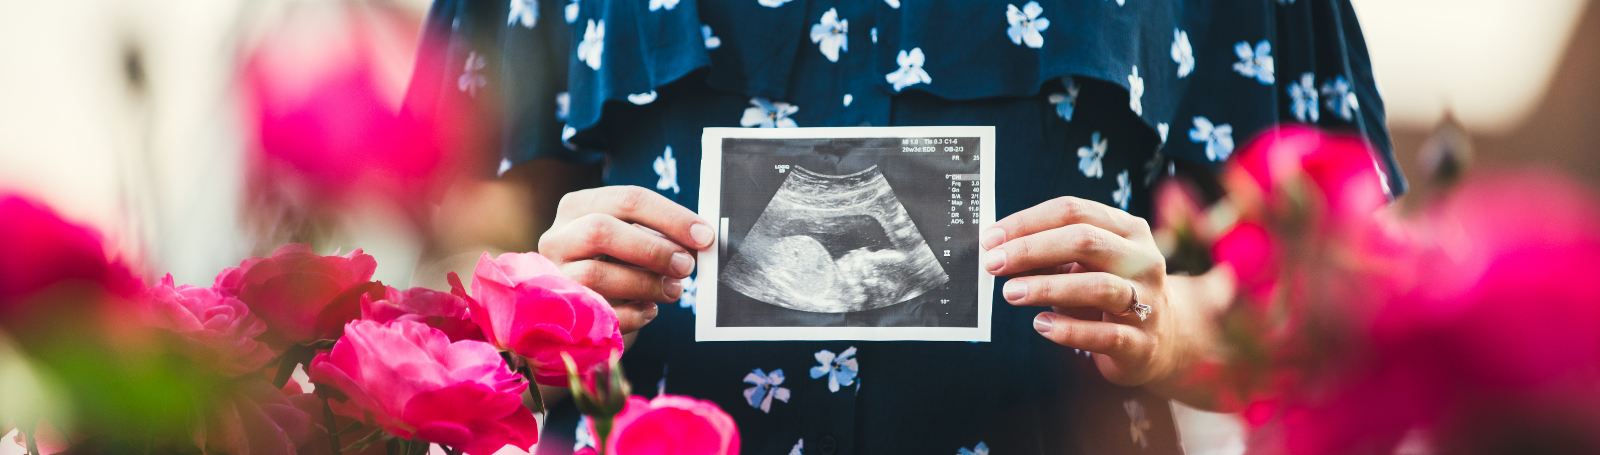 pregnant woman holding ultrasound image of baby